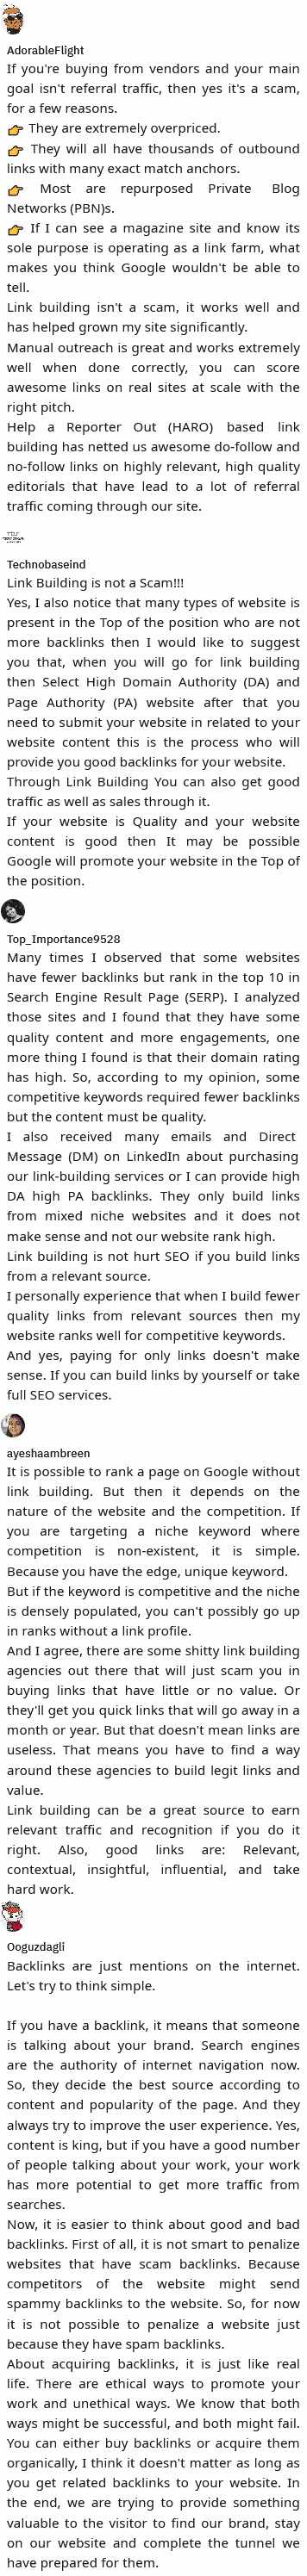 link building is not a scam websites need backlinks